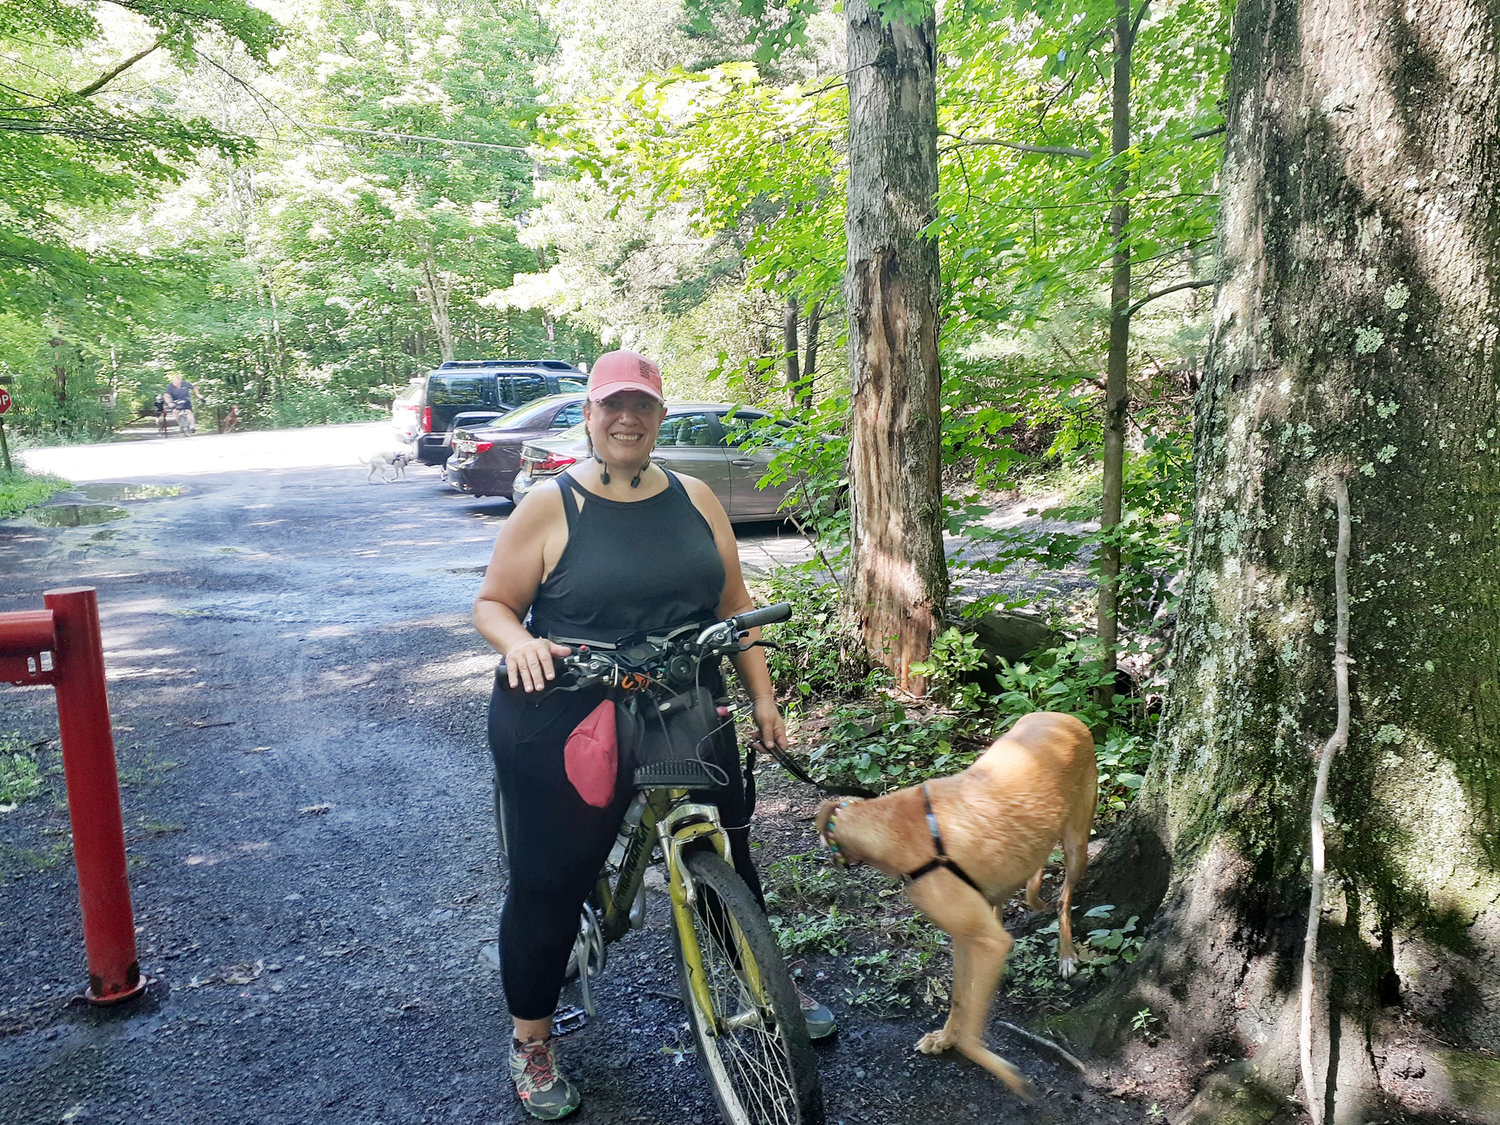 Lisa McGovern and Rocket at the Marcotte Road trailhead. Special posted rules include, stay 6' away, keep to the right, do not block trail, pass on the left and try not to touch surfaces.